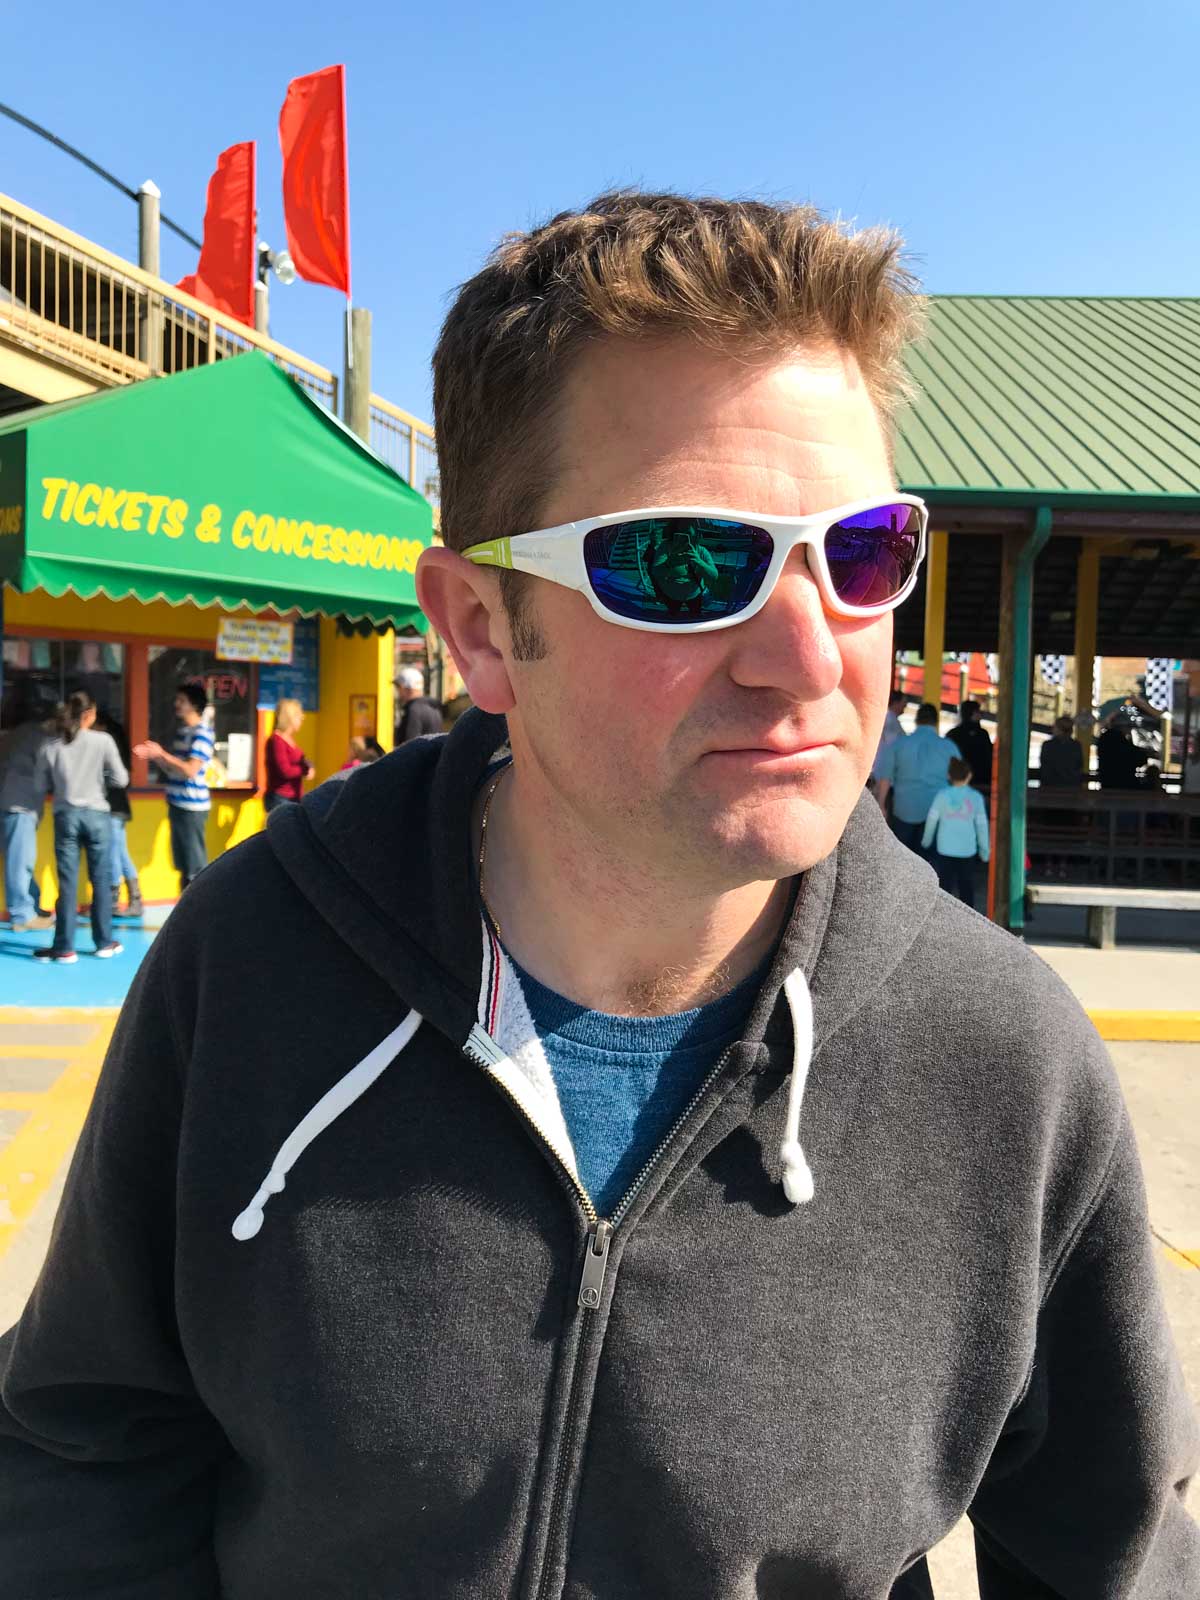 My husband Tim is wearing sunglasses and doing a silly pose standing in line at The Track.